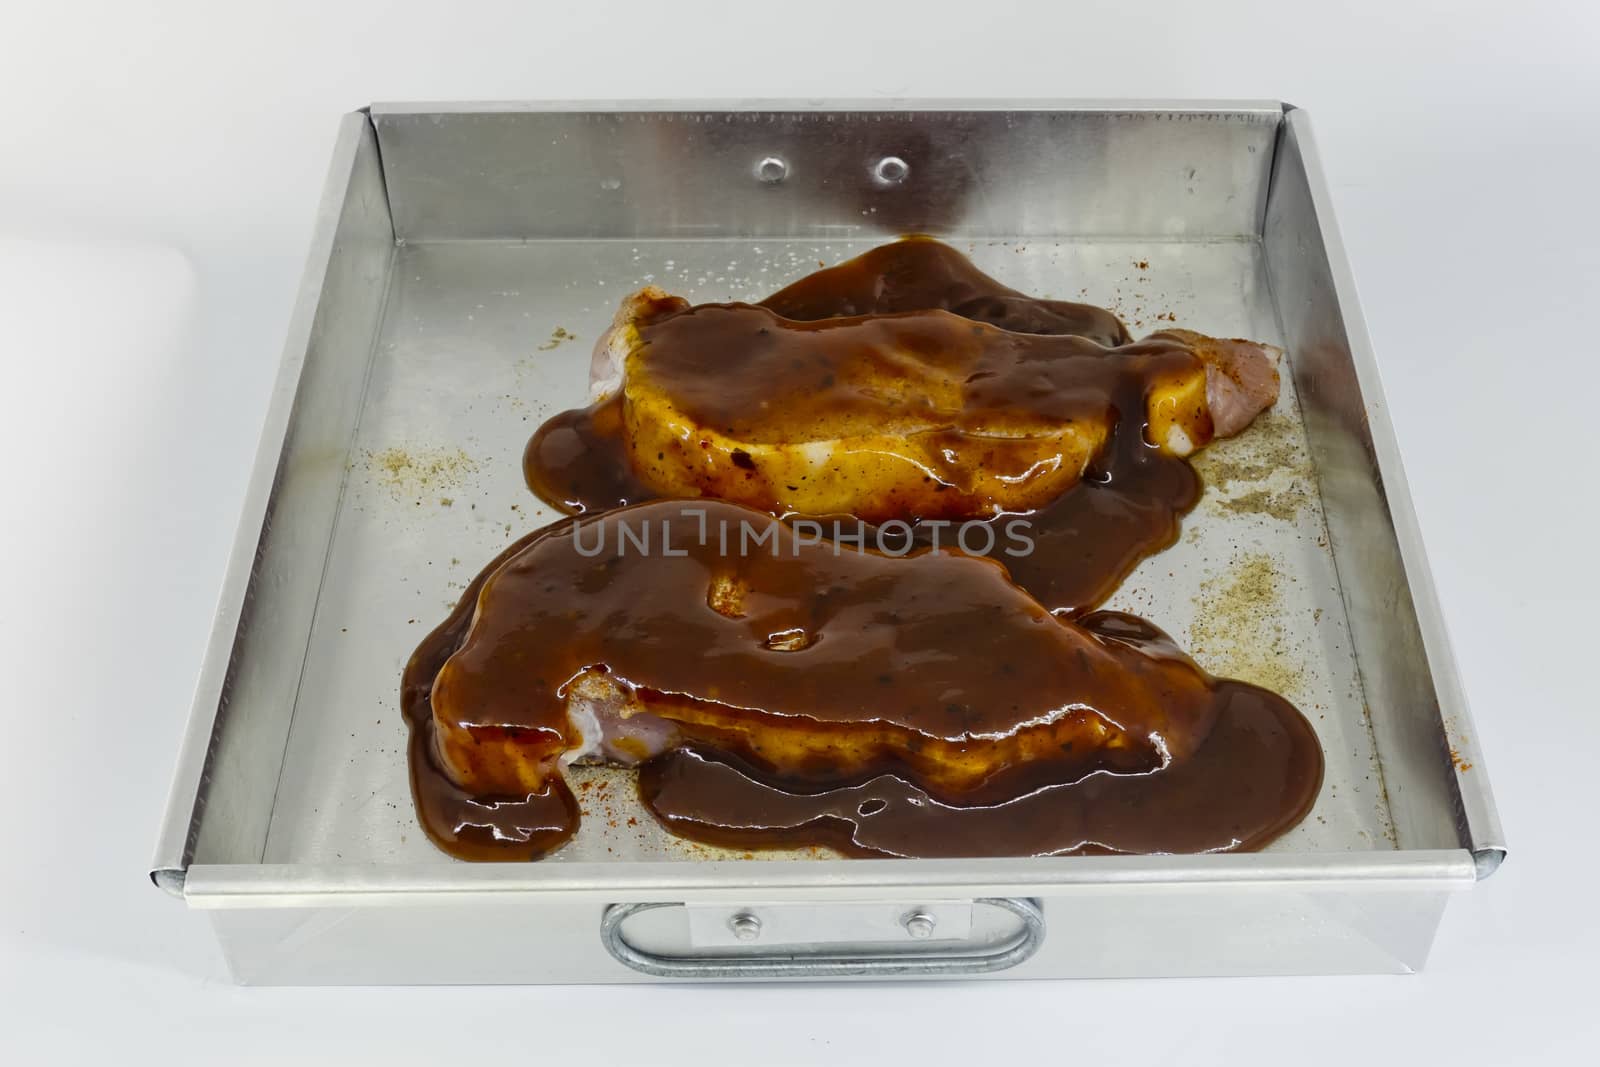 Raw pork fillet with barbecue sauce in baking tin by art9858